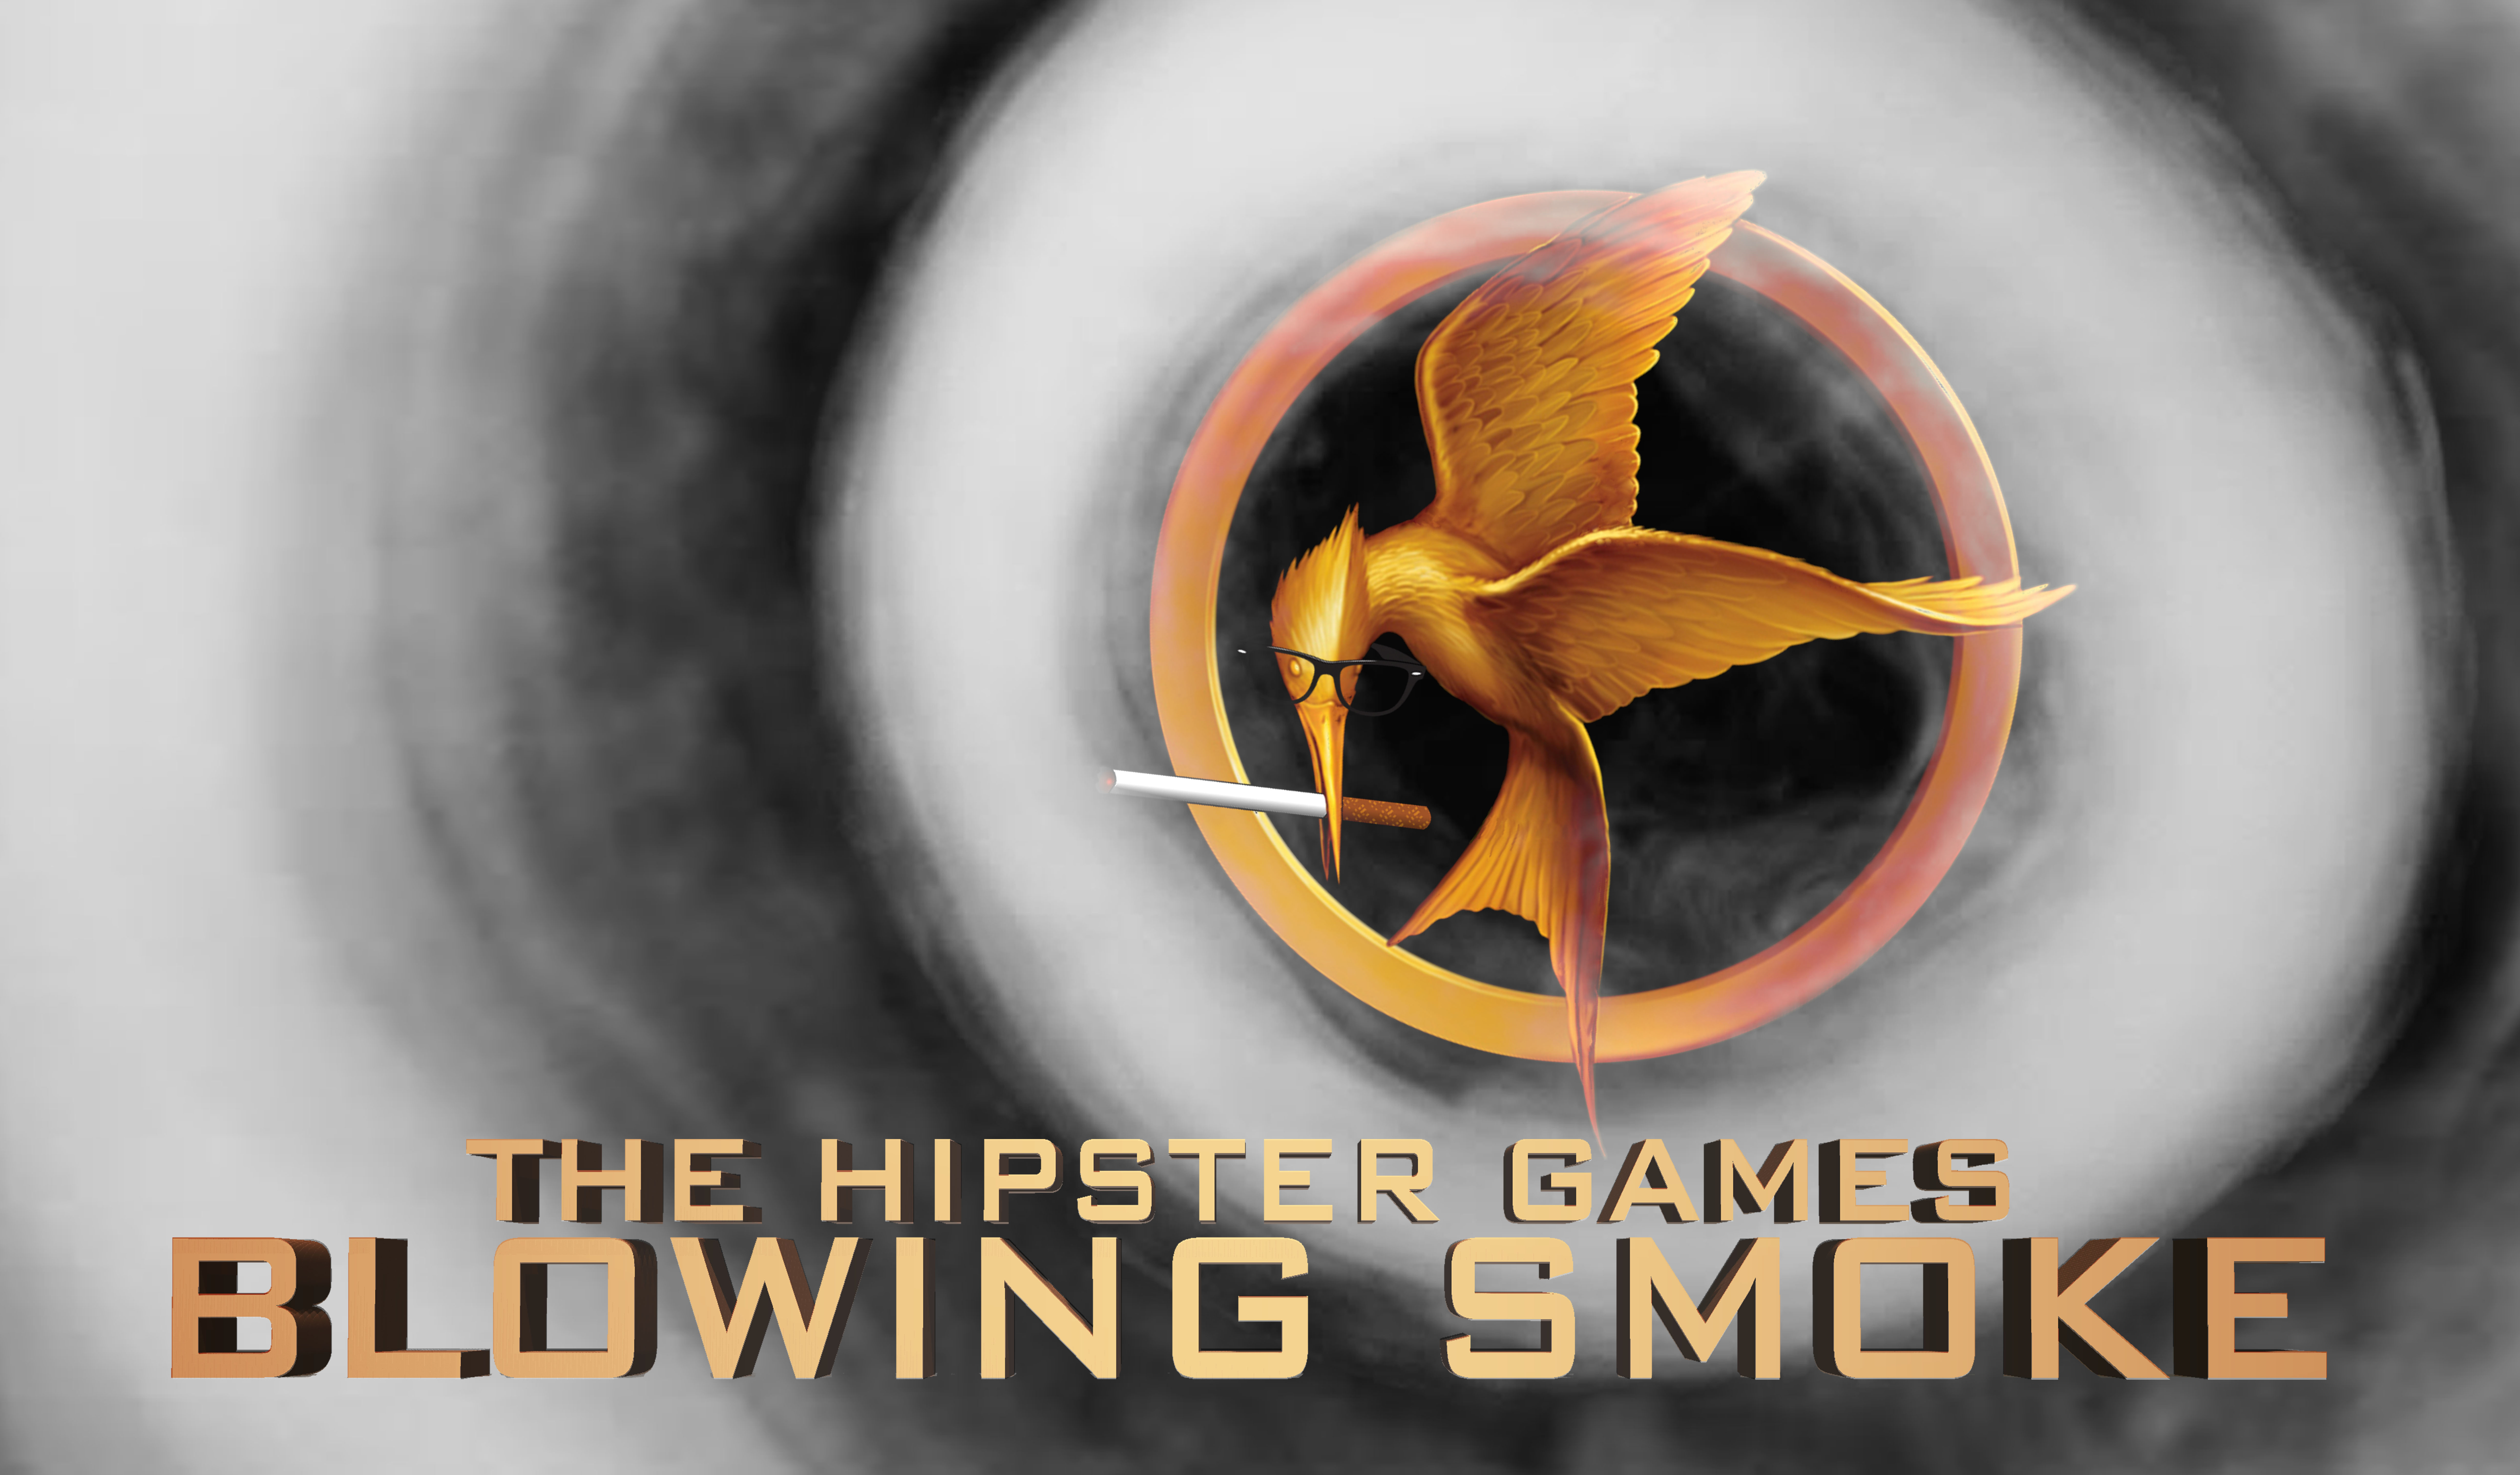 Hipster Games: Blowing Smoke - Wide Poster